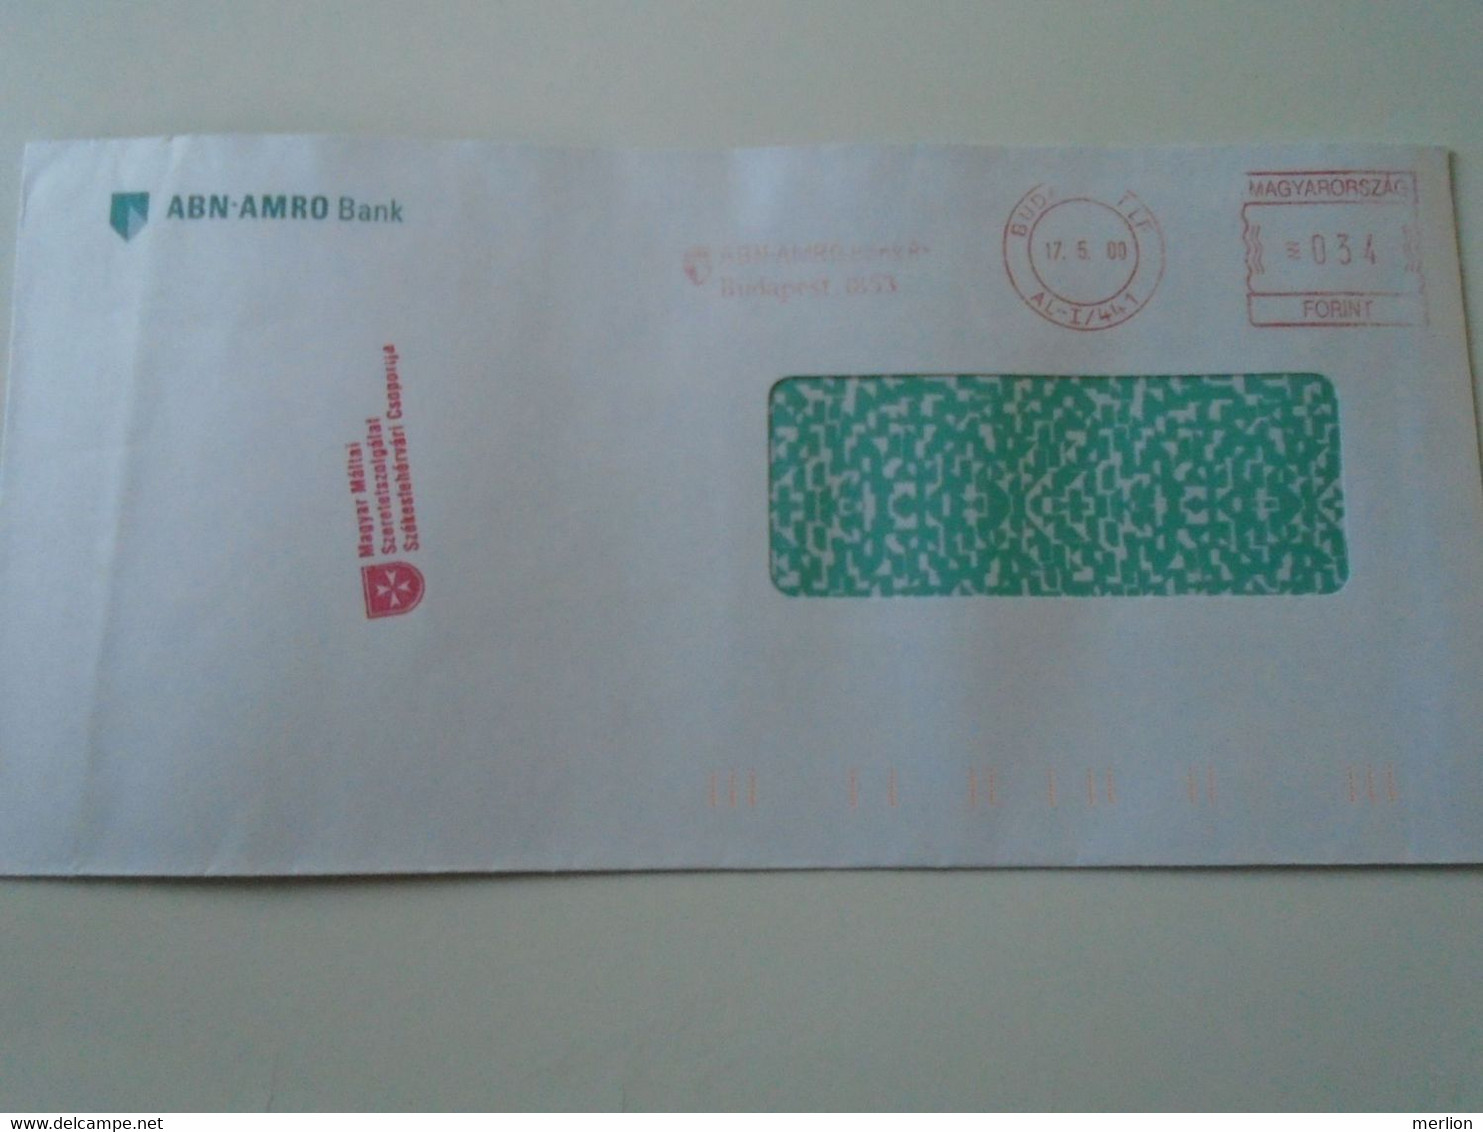 AD00012.116  Hungary Cover  -EMA Red Meter Freistempel-  Ca 2000   Budapest  ABN AMRO  Bank - Maltese Charity Service - Timbres De Distributeurs [ATM]